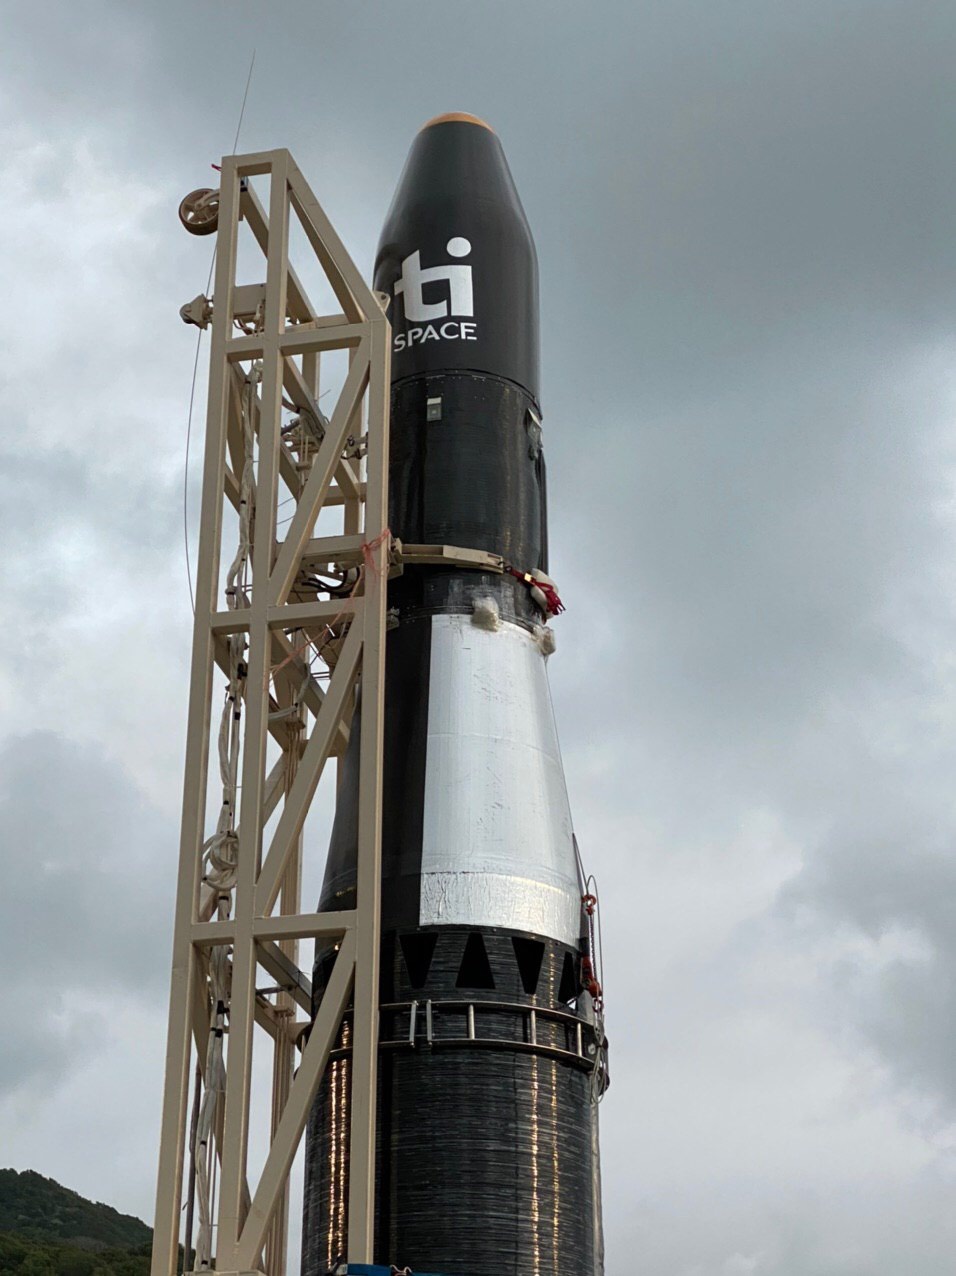 Our Hapith I launch vehicle is standing on the launch pad and getting ready for its maiden flight.